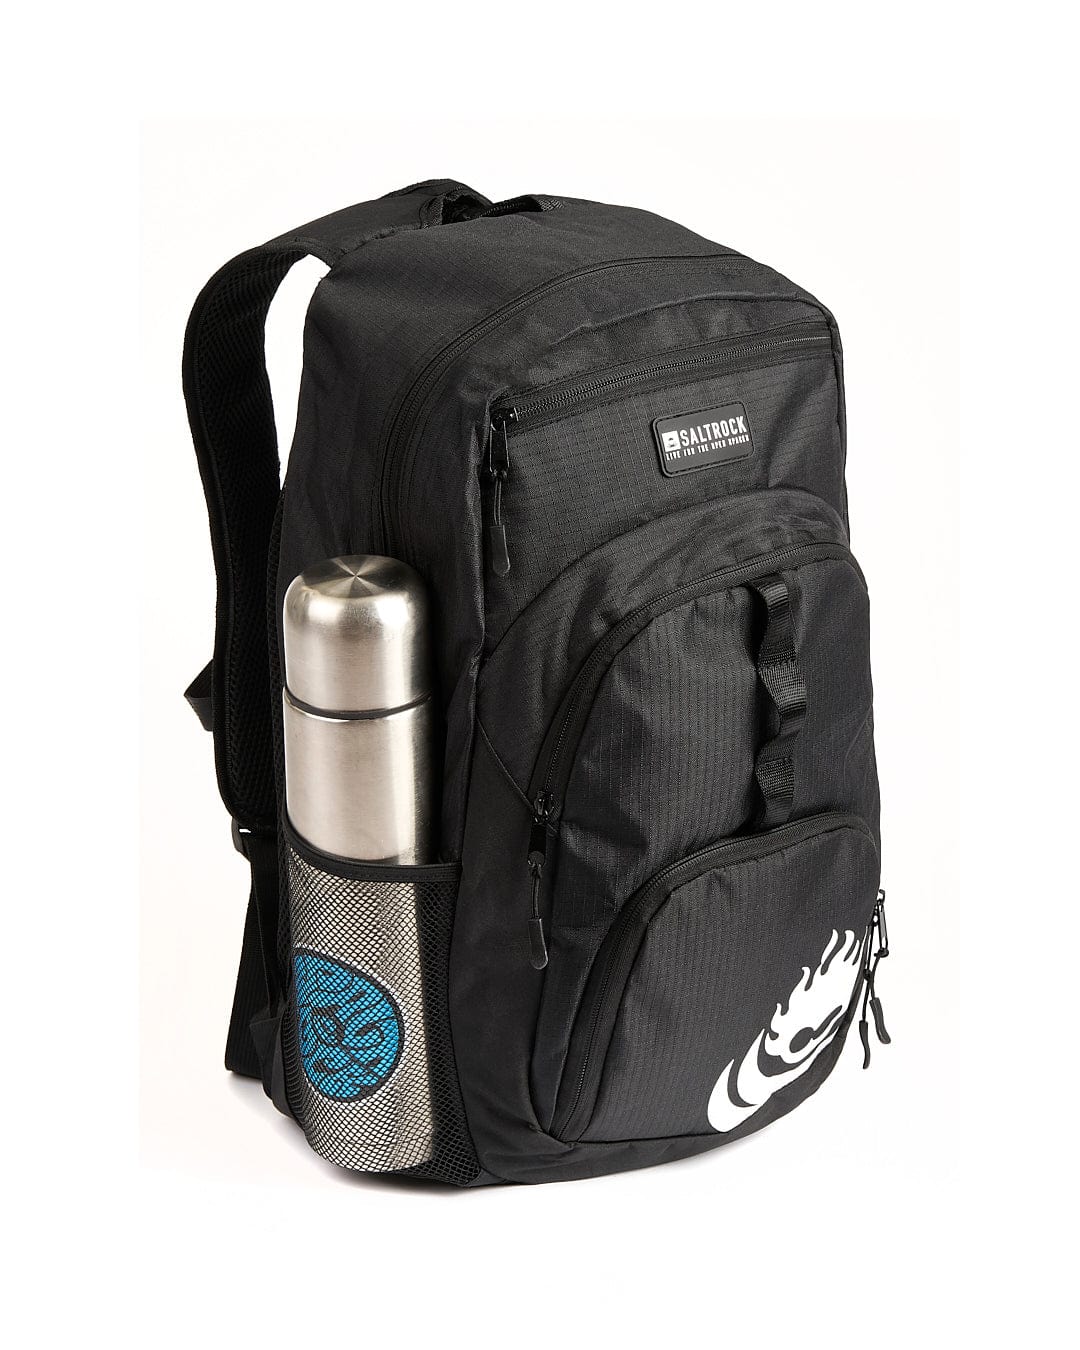 A Saltrock - Boardwalk Backpack - Black with a cup and a bottle.